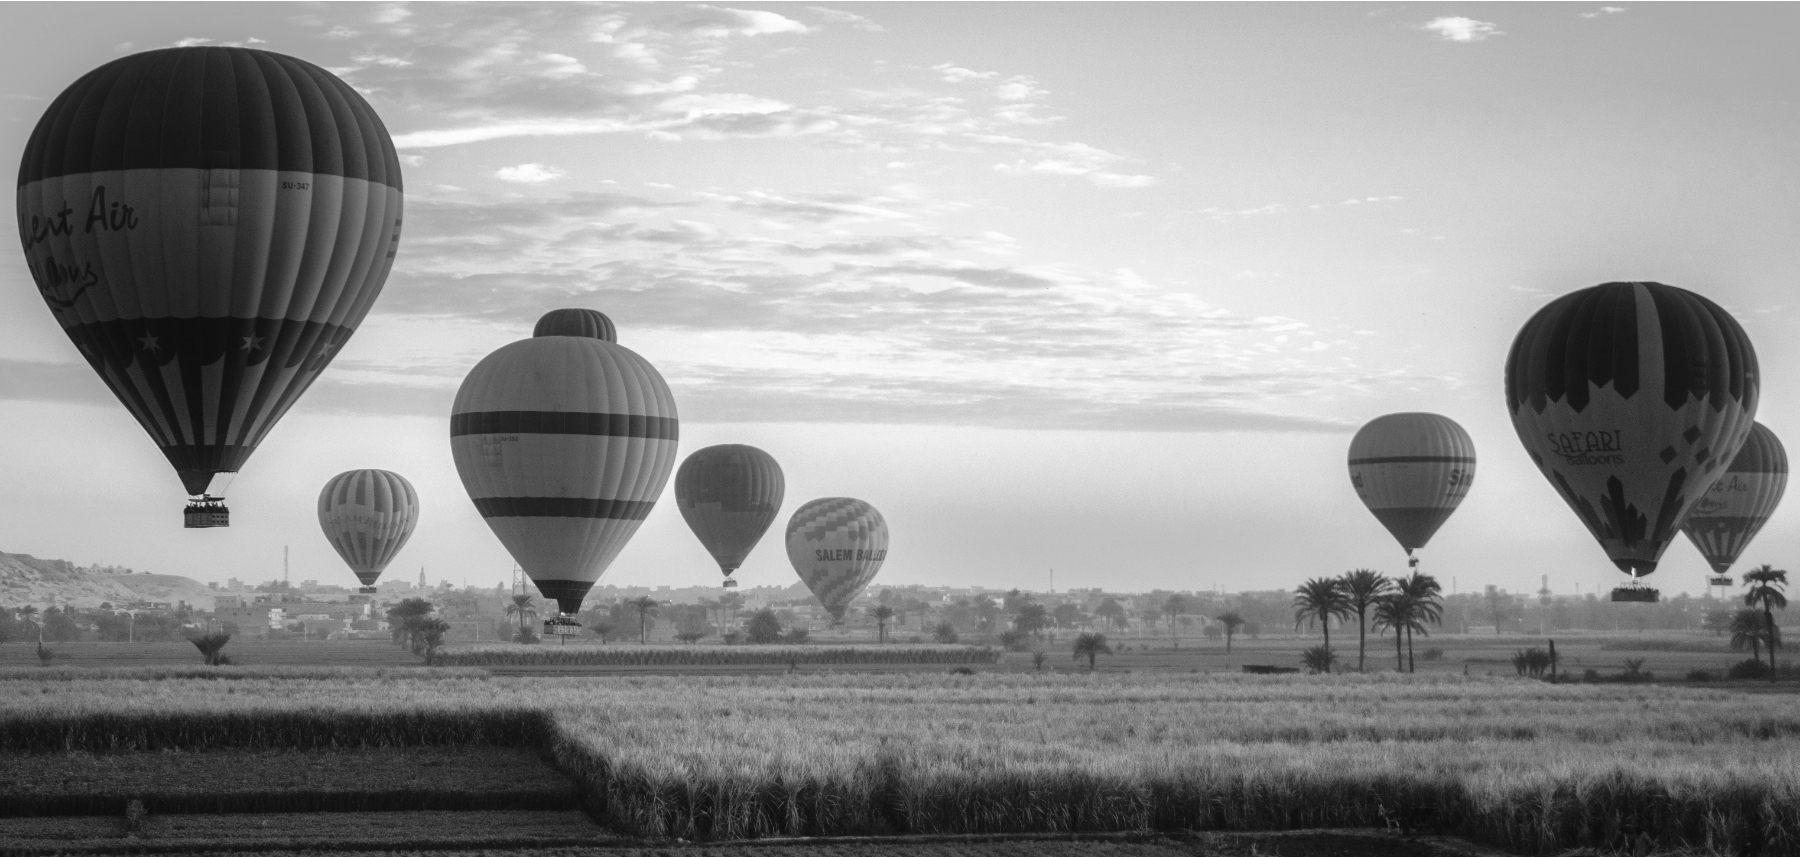 Hot air balloons flying over a field in black and white.